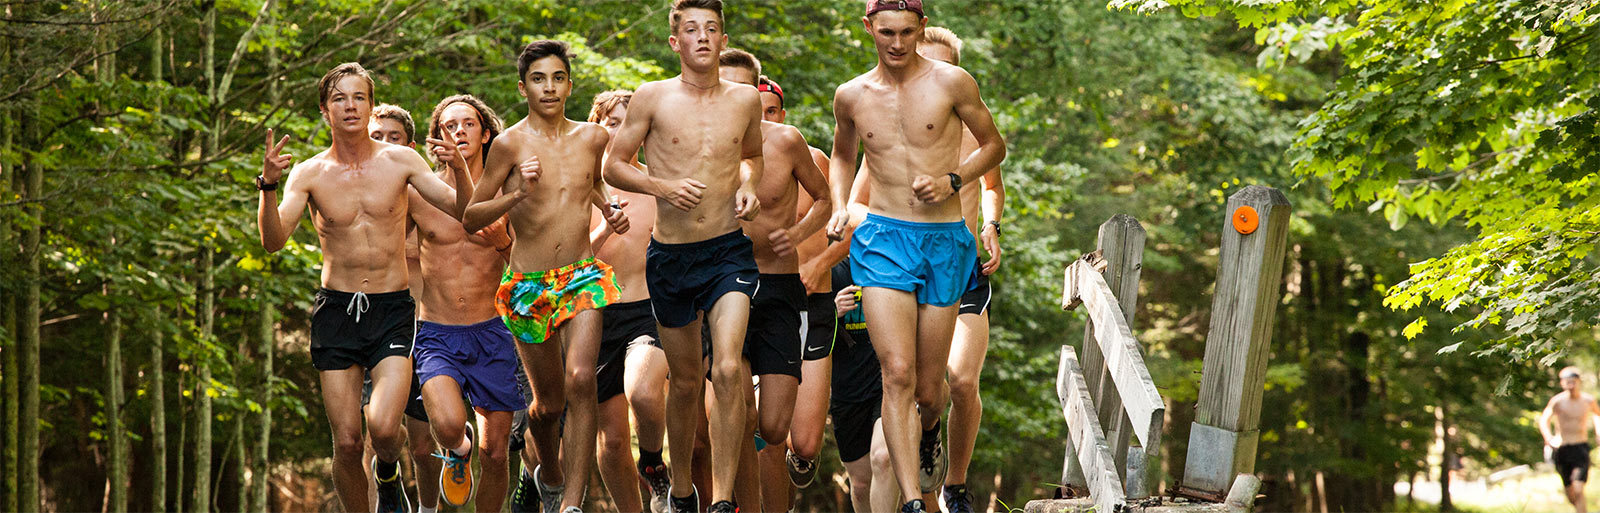 Nike Cross Country Running Camps Five Star Camp - XC Camp